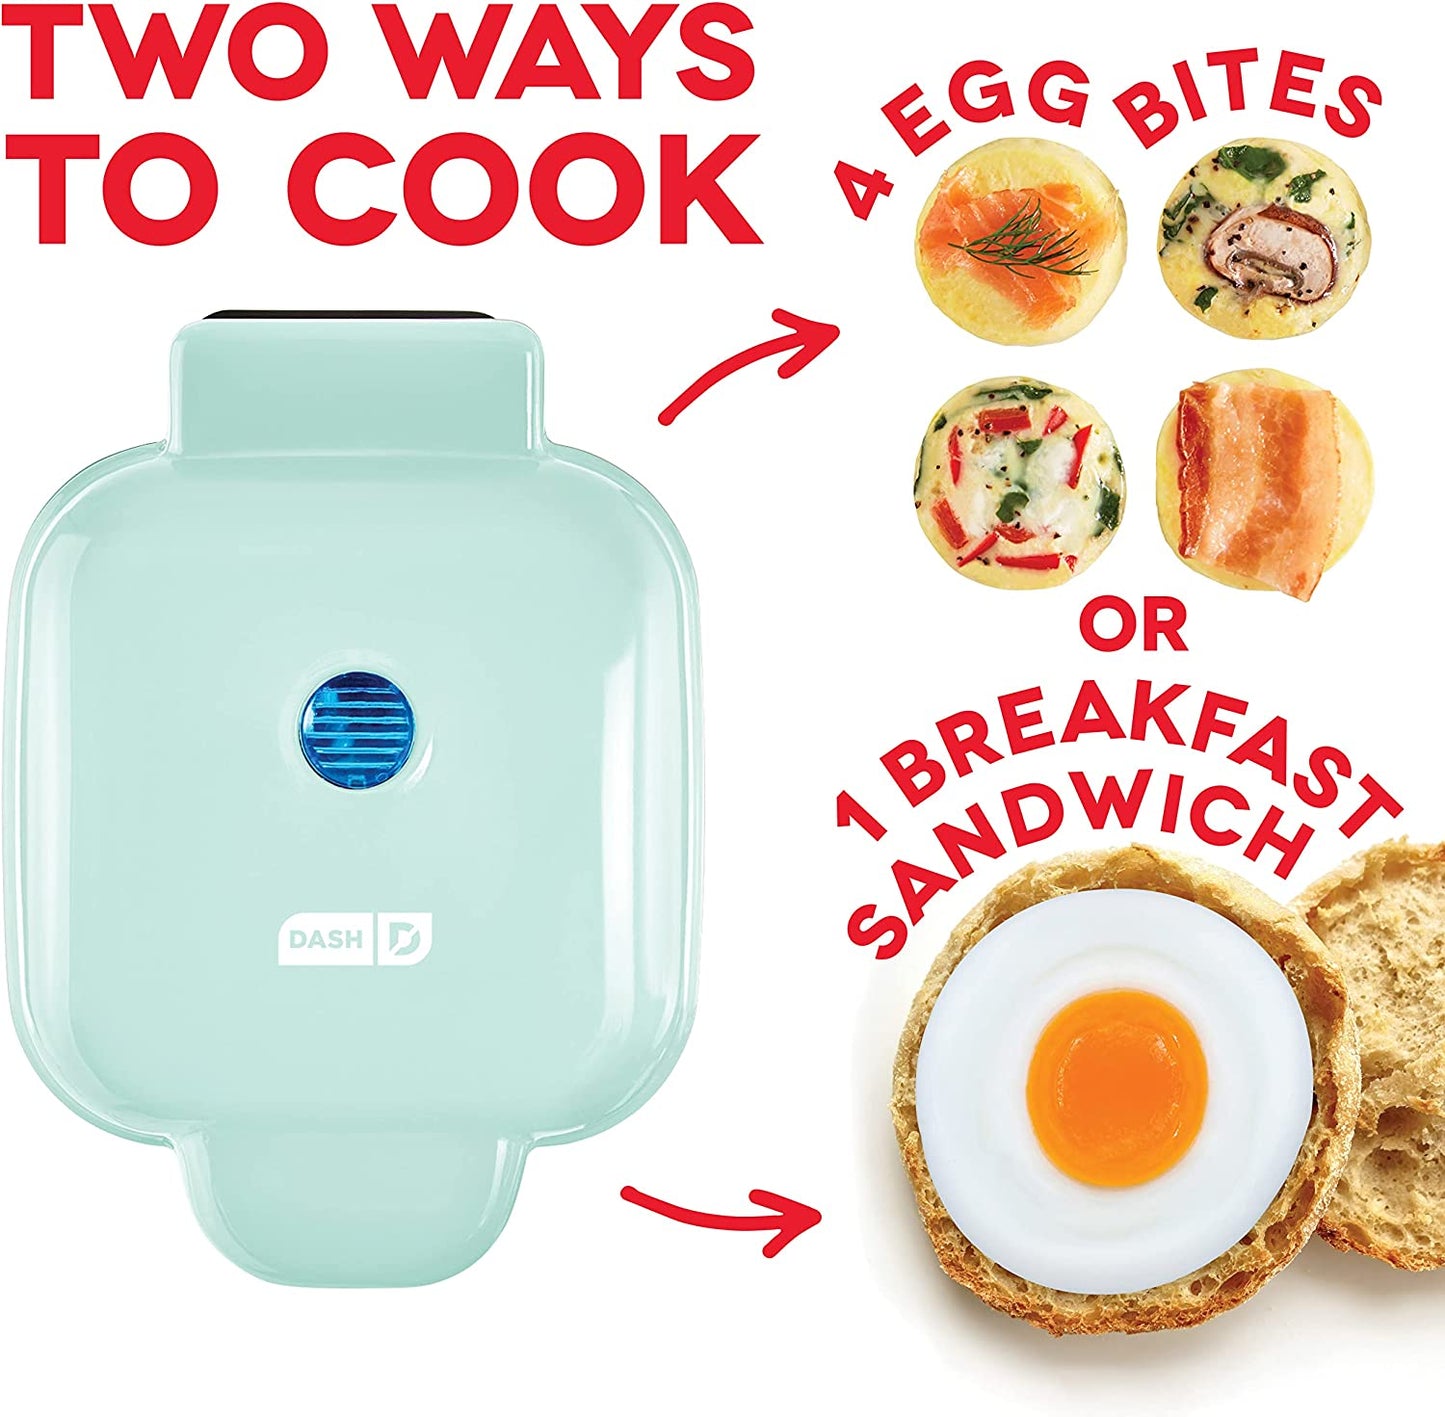 An aqua colored egg sandwich and bite maker. There is text which reads, 'Two ways to cook, 4 egg bites or 1 breakfast sandwich.'